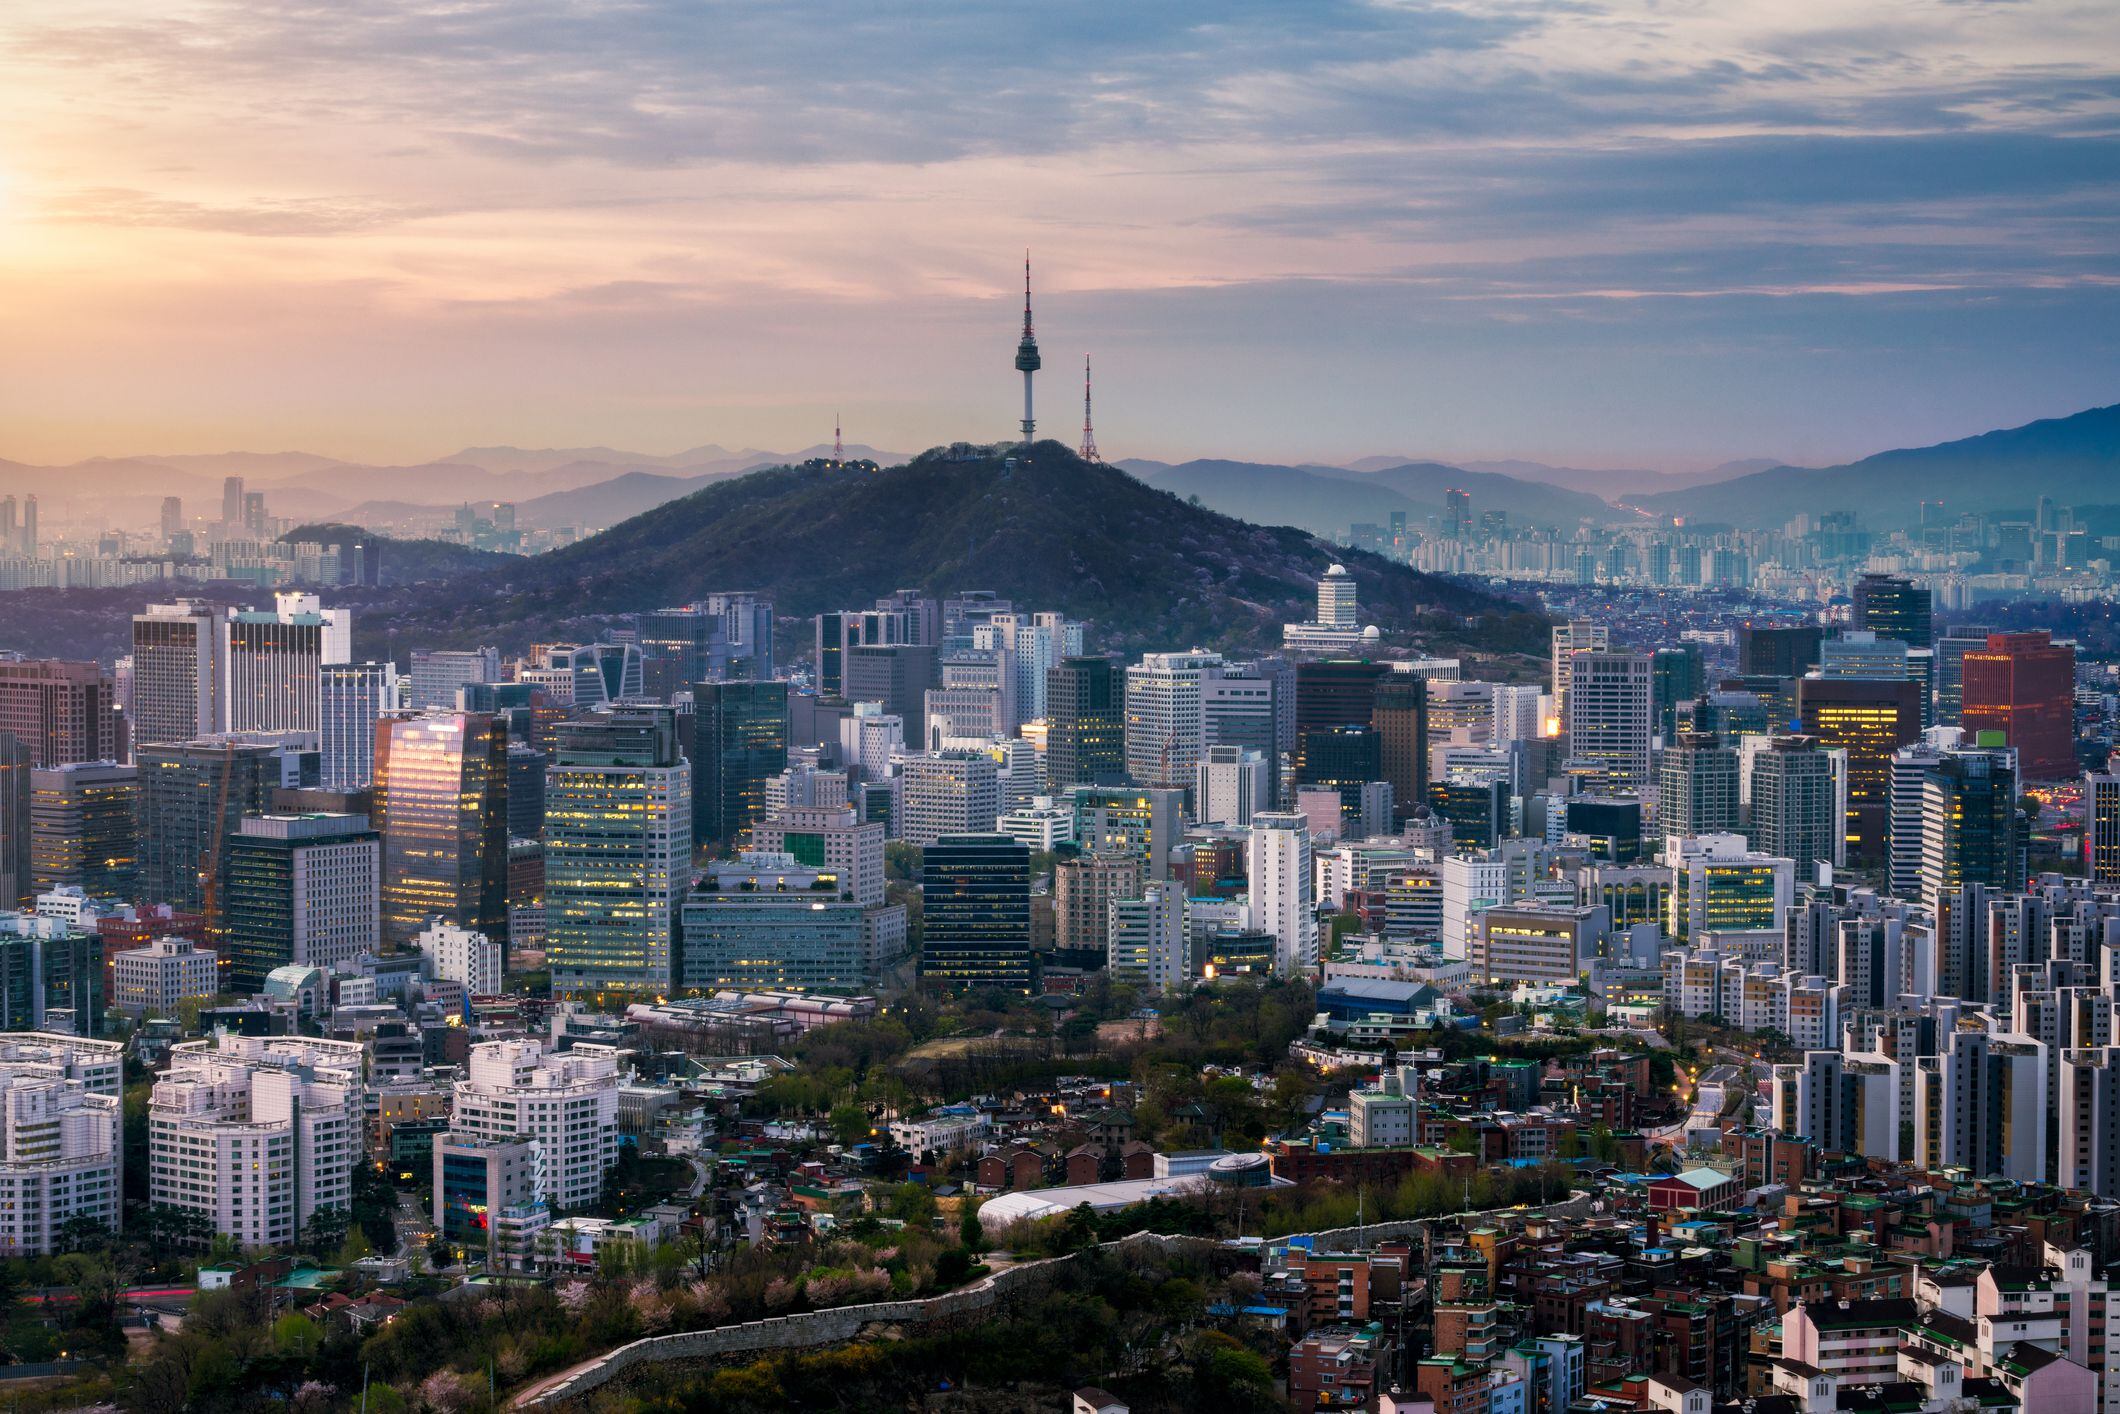  The best viewpoint and trekking from inwangsan mountain in Seoul city, South Korea. Getty